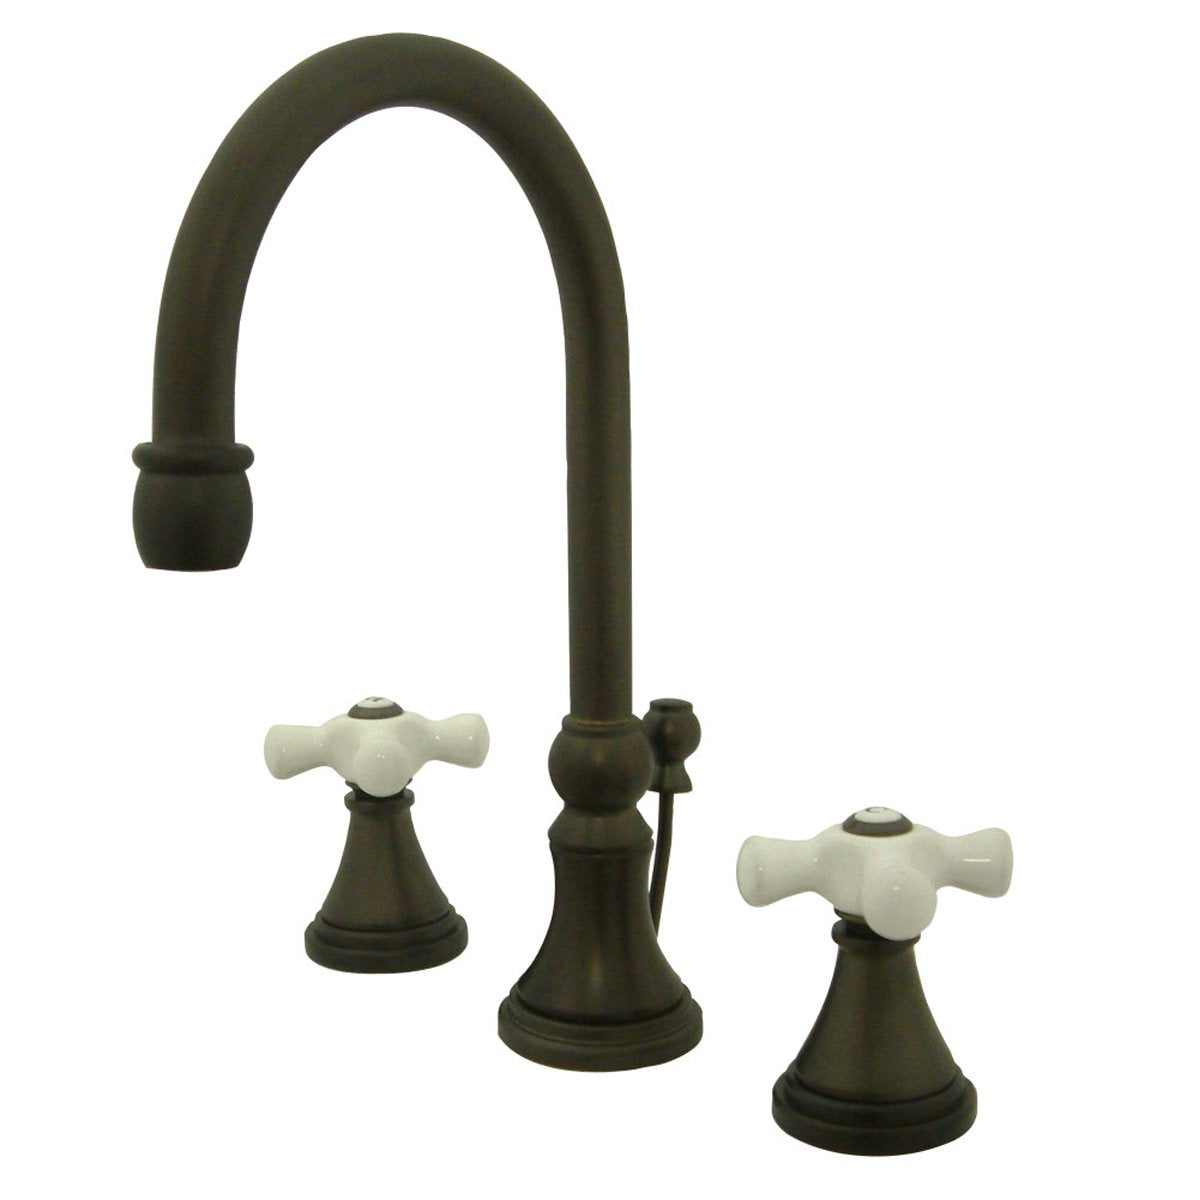 Kingston Brass Governor 8-Inch Widespread Deck Mount Bathroom Faucet